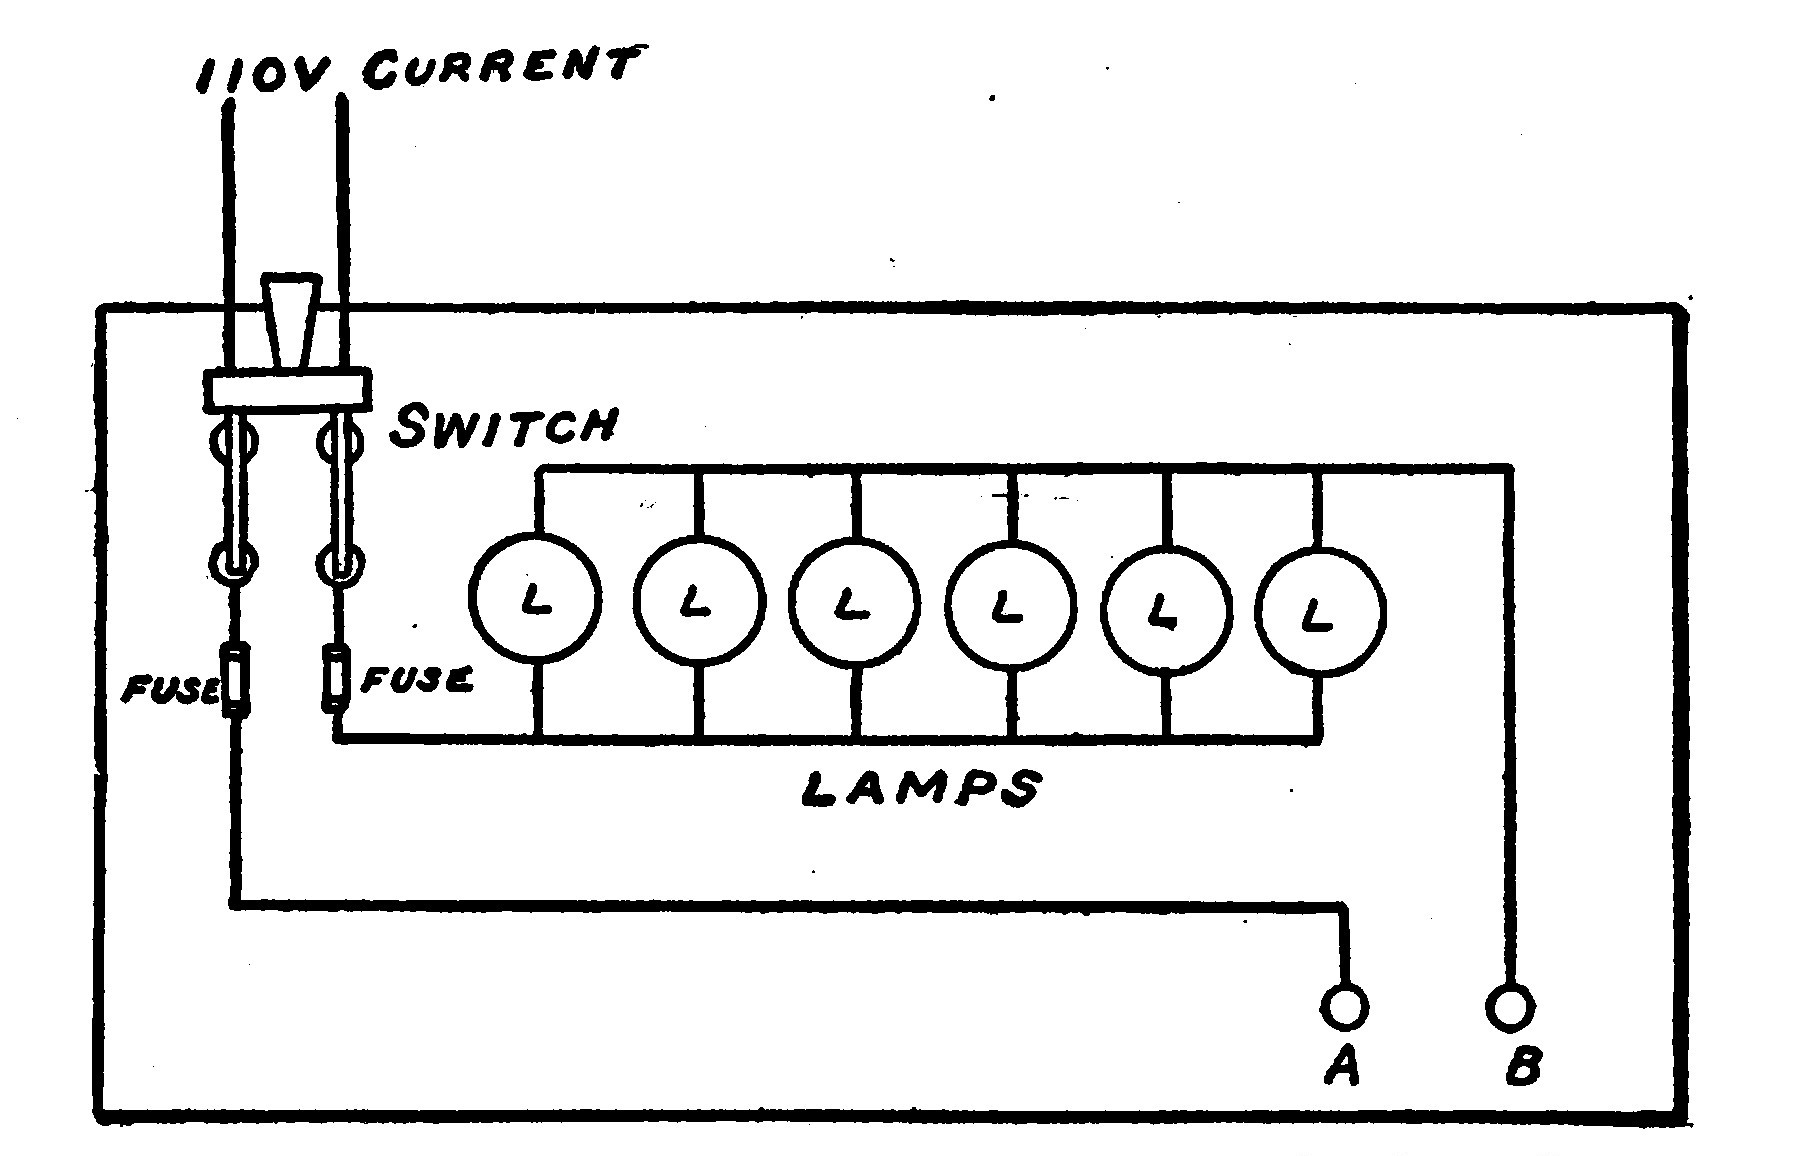 Fig 312.—Top View of Lamp Bank, showing how the Circuit is arranged.